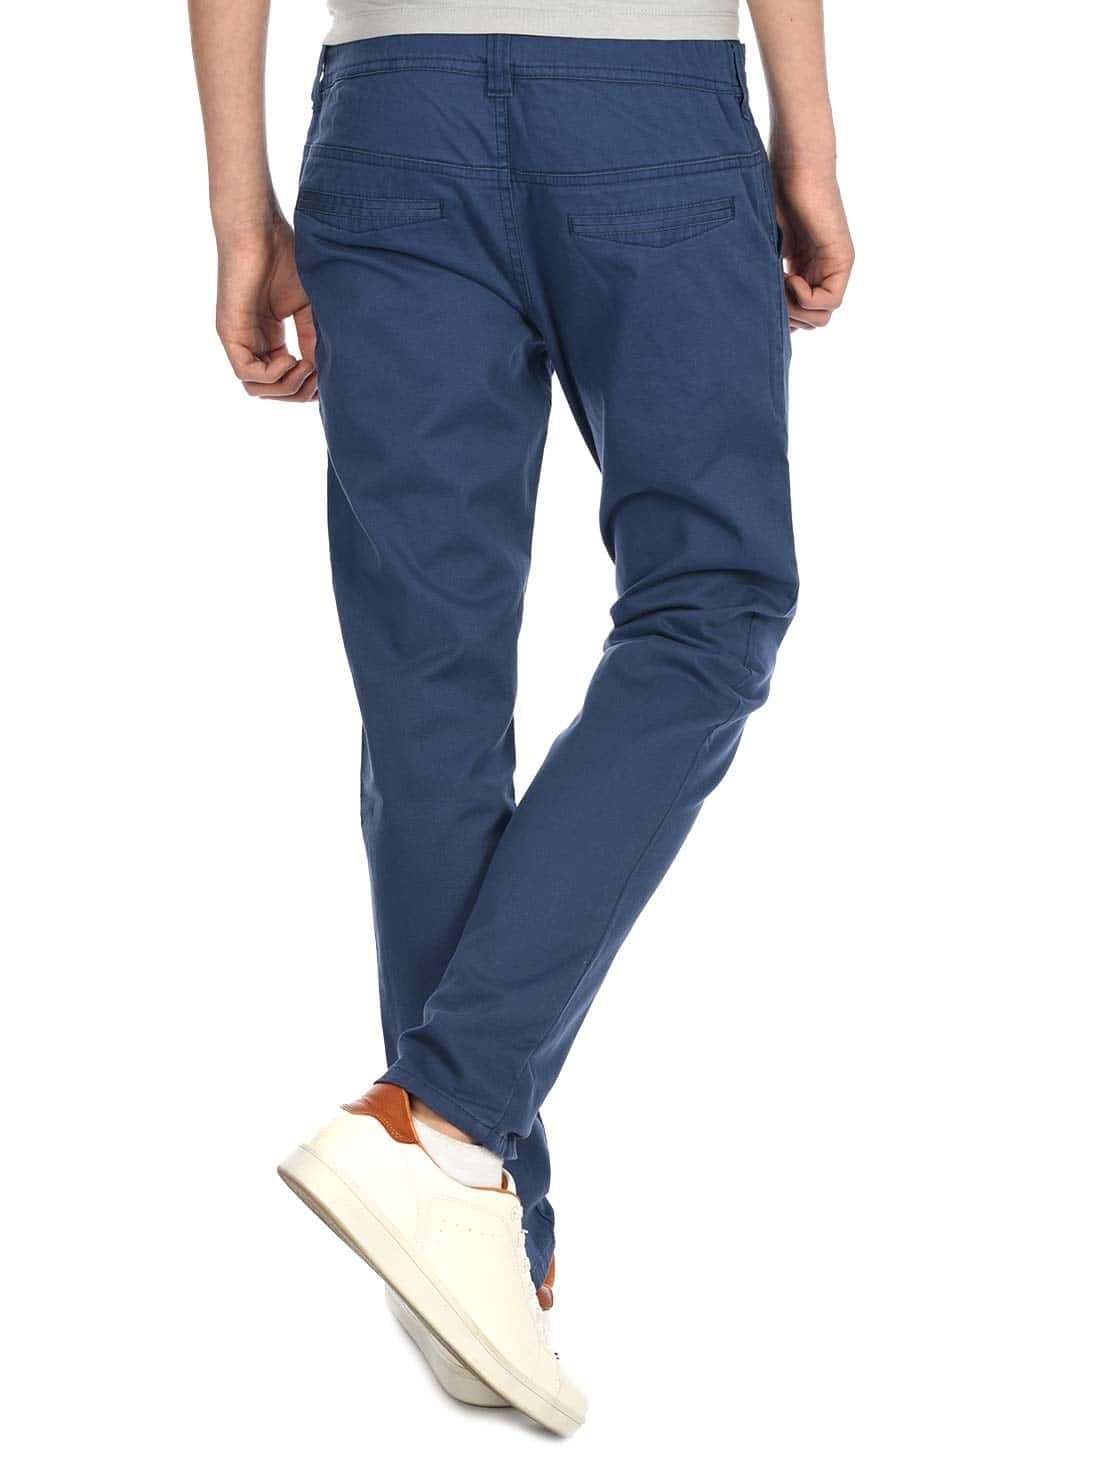 (1-tlg) Chinohose Chino Jeansblau BEZLIT casual Jungen Hose